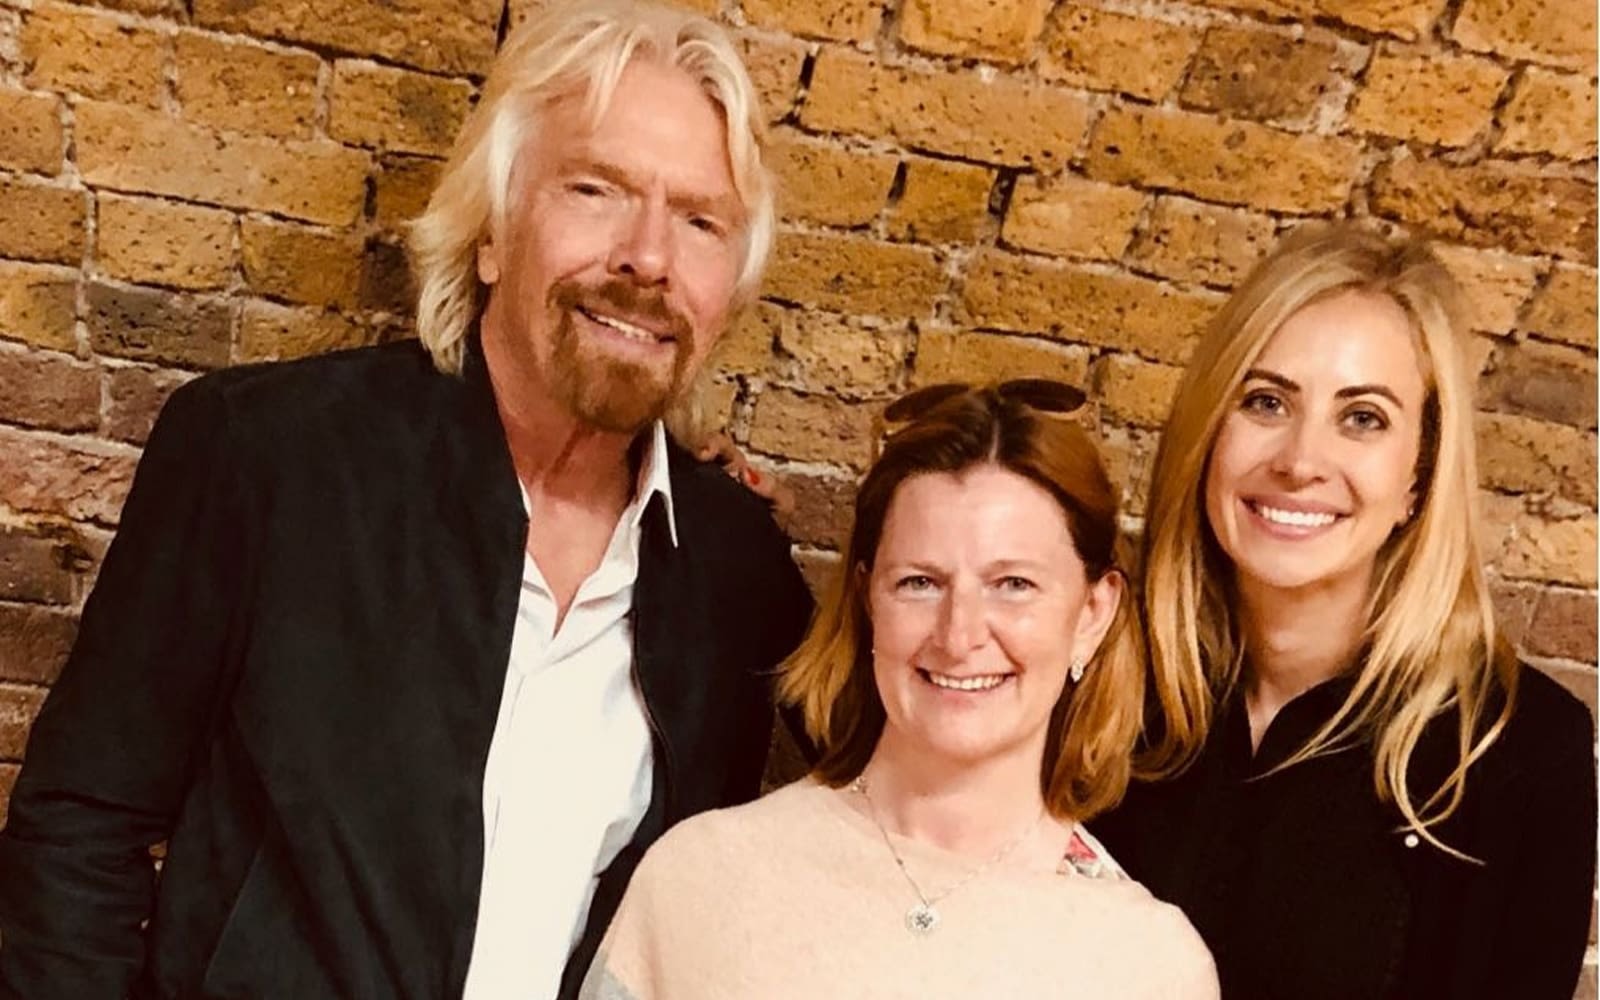 Richard Branson and Holly Branson with the winner of the VOOM Unite Impact Award 2018